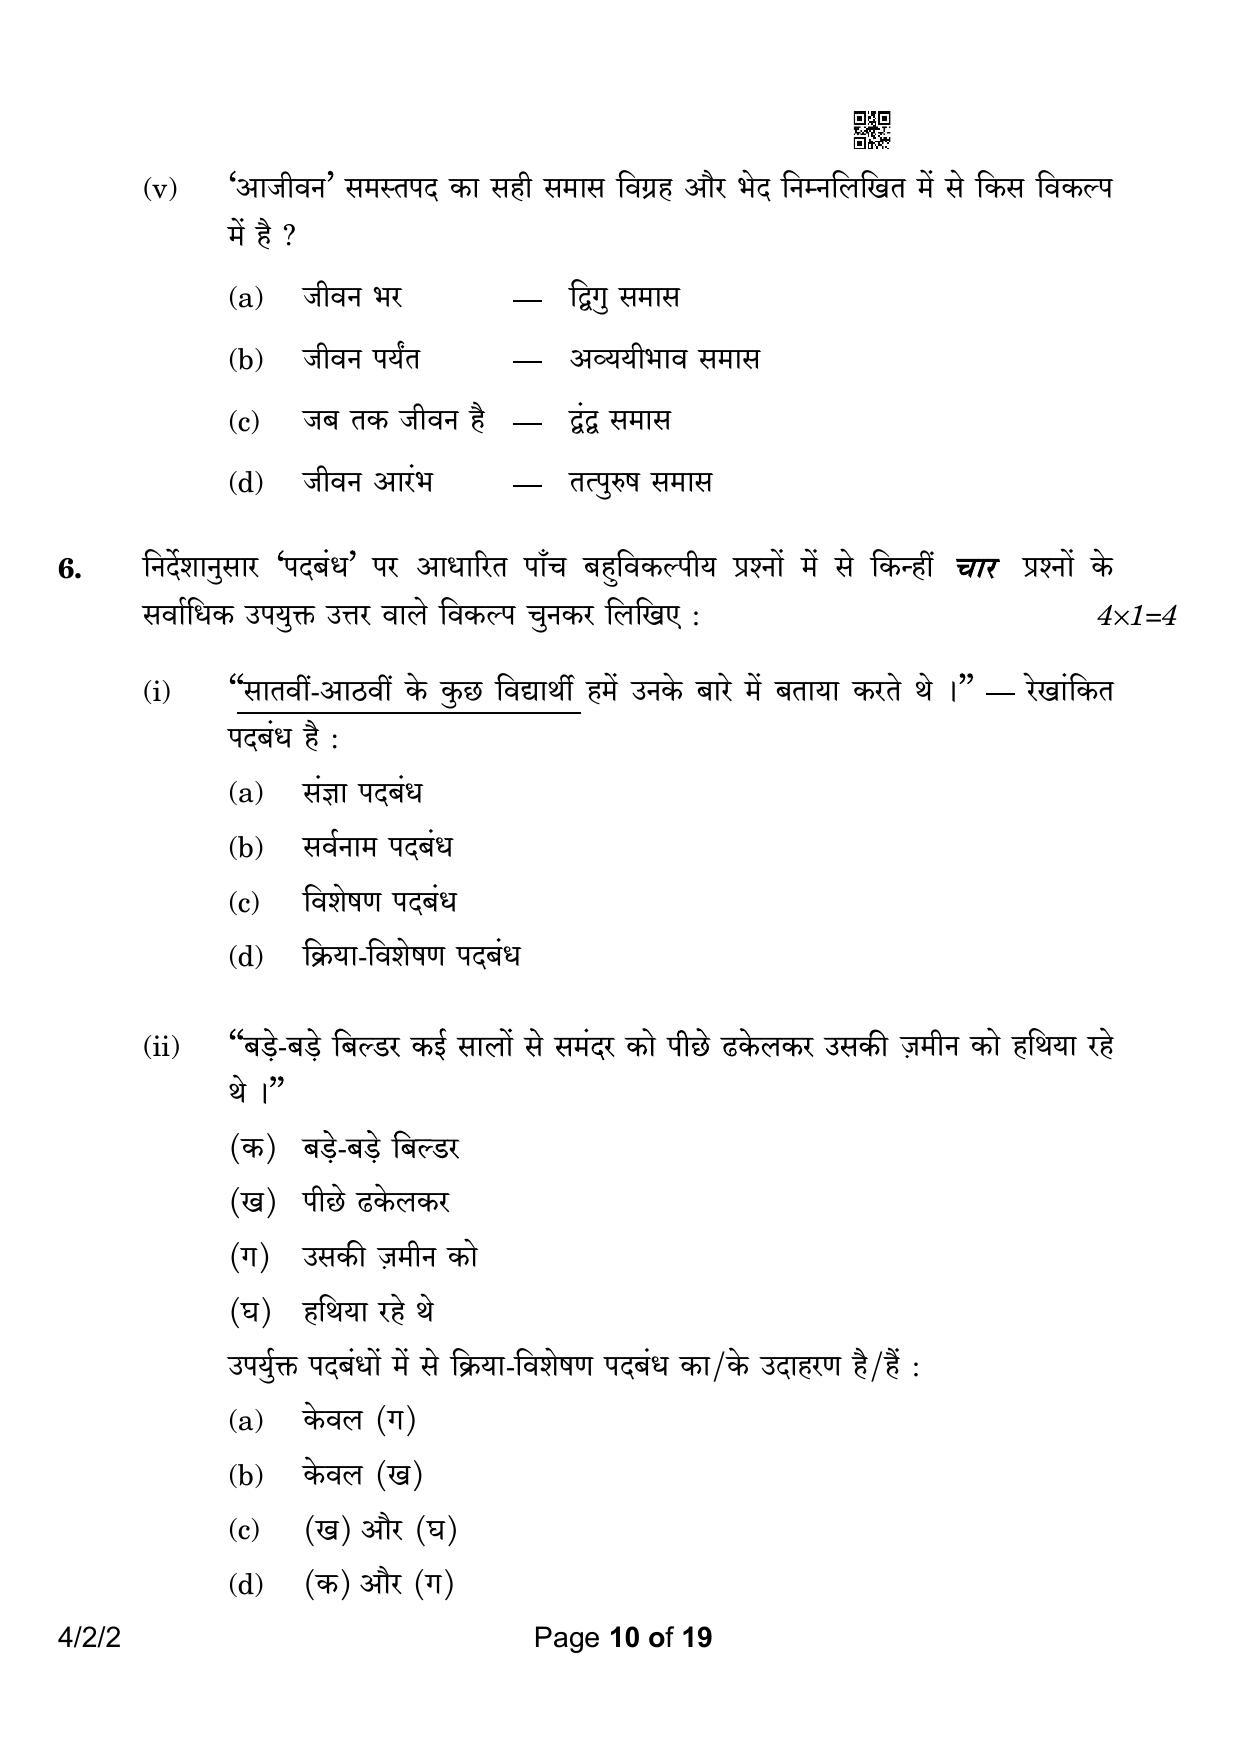 CBSE Class 10 4-2-2 Hindi B 2023 Question Paper - Page 10